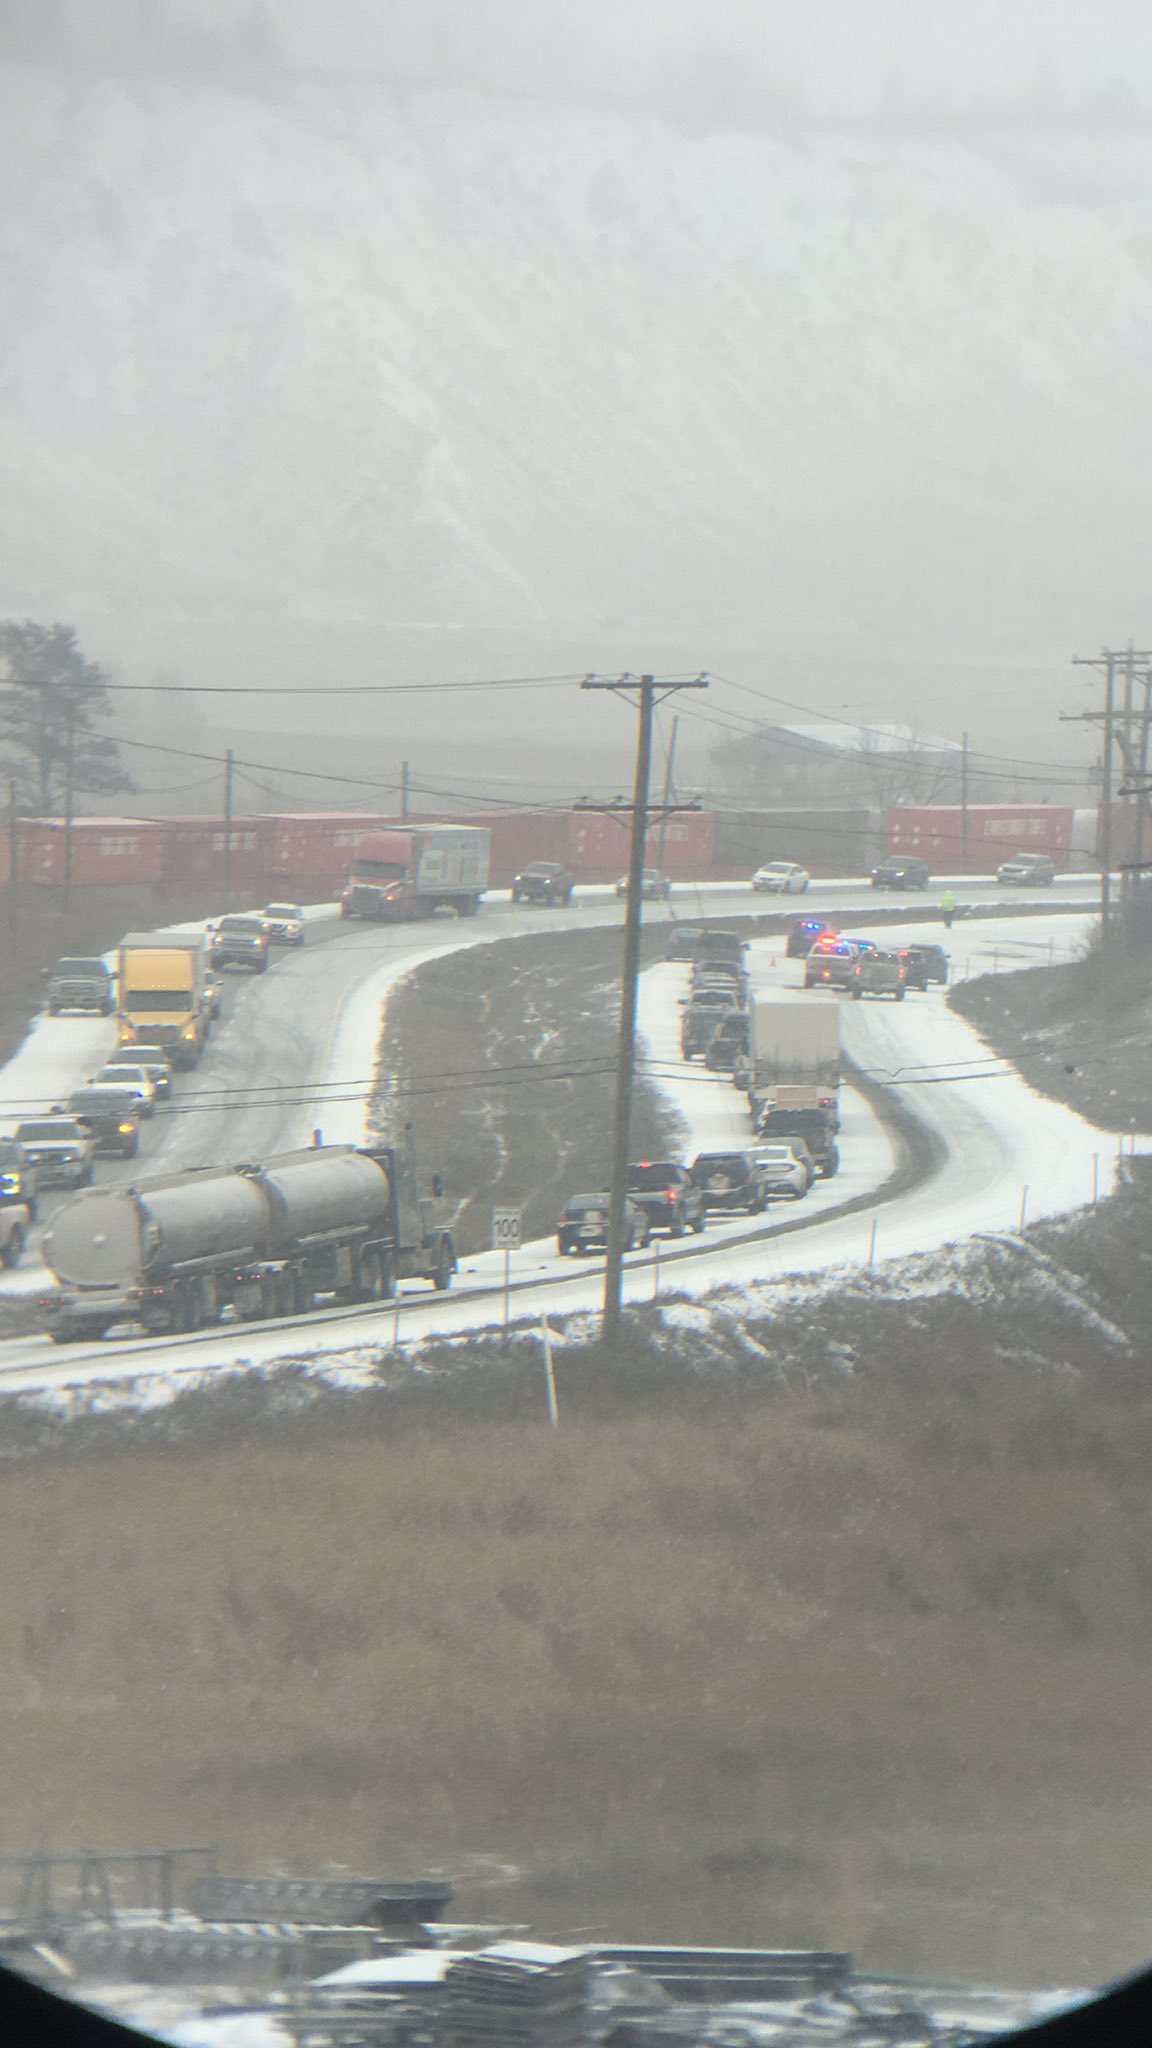 Traffic backed up along Highway 1 eastbound in Kamloops Monday after a fatal crash closed the road.